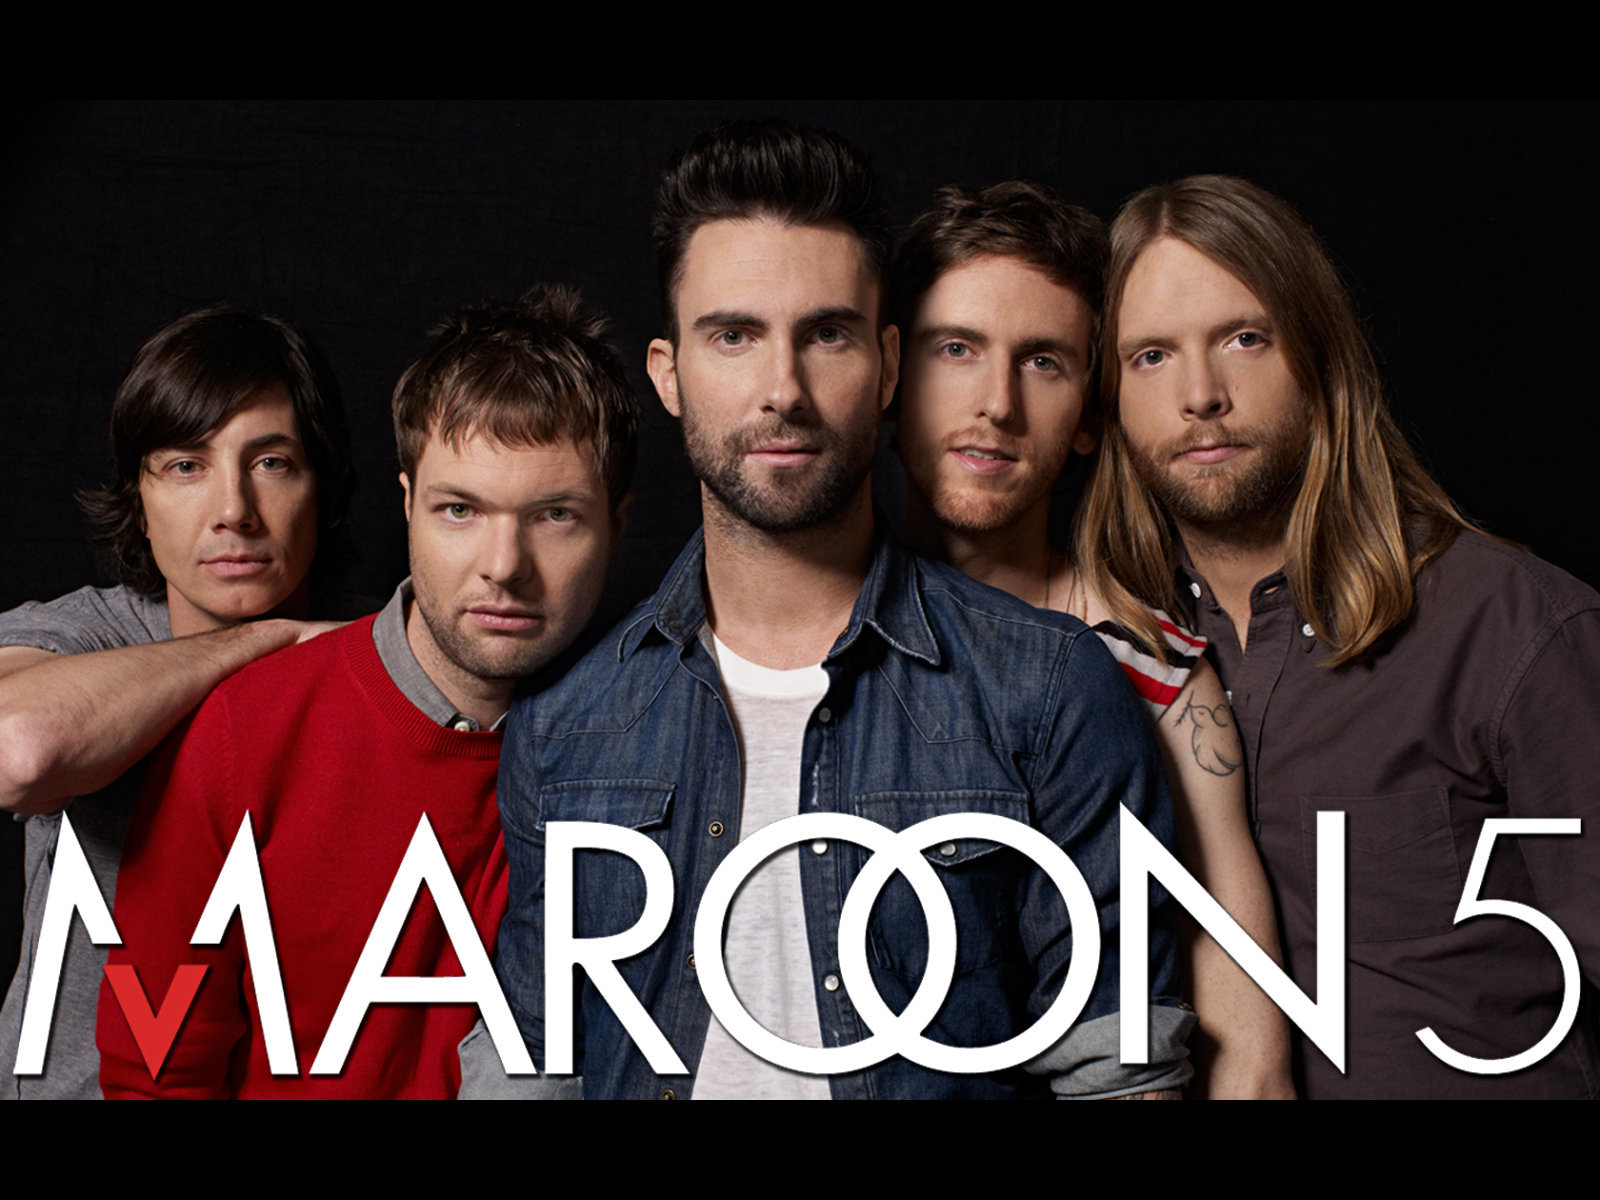 Maroon 5 to Perform During 'America's Got Talent' Live Results Show September 3 - Ratings | TVbytheNumbers.Zap2it.com